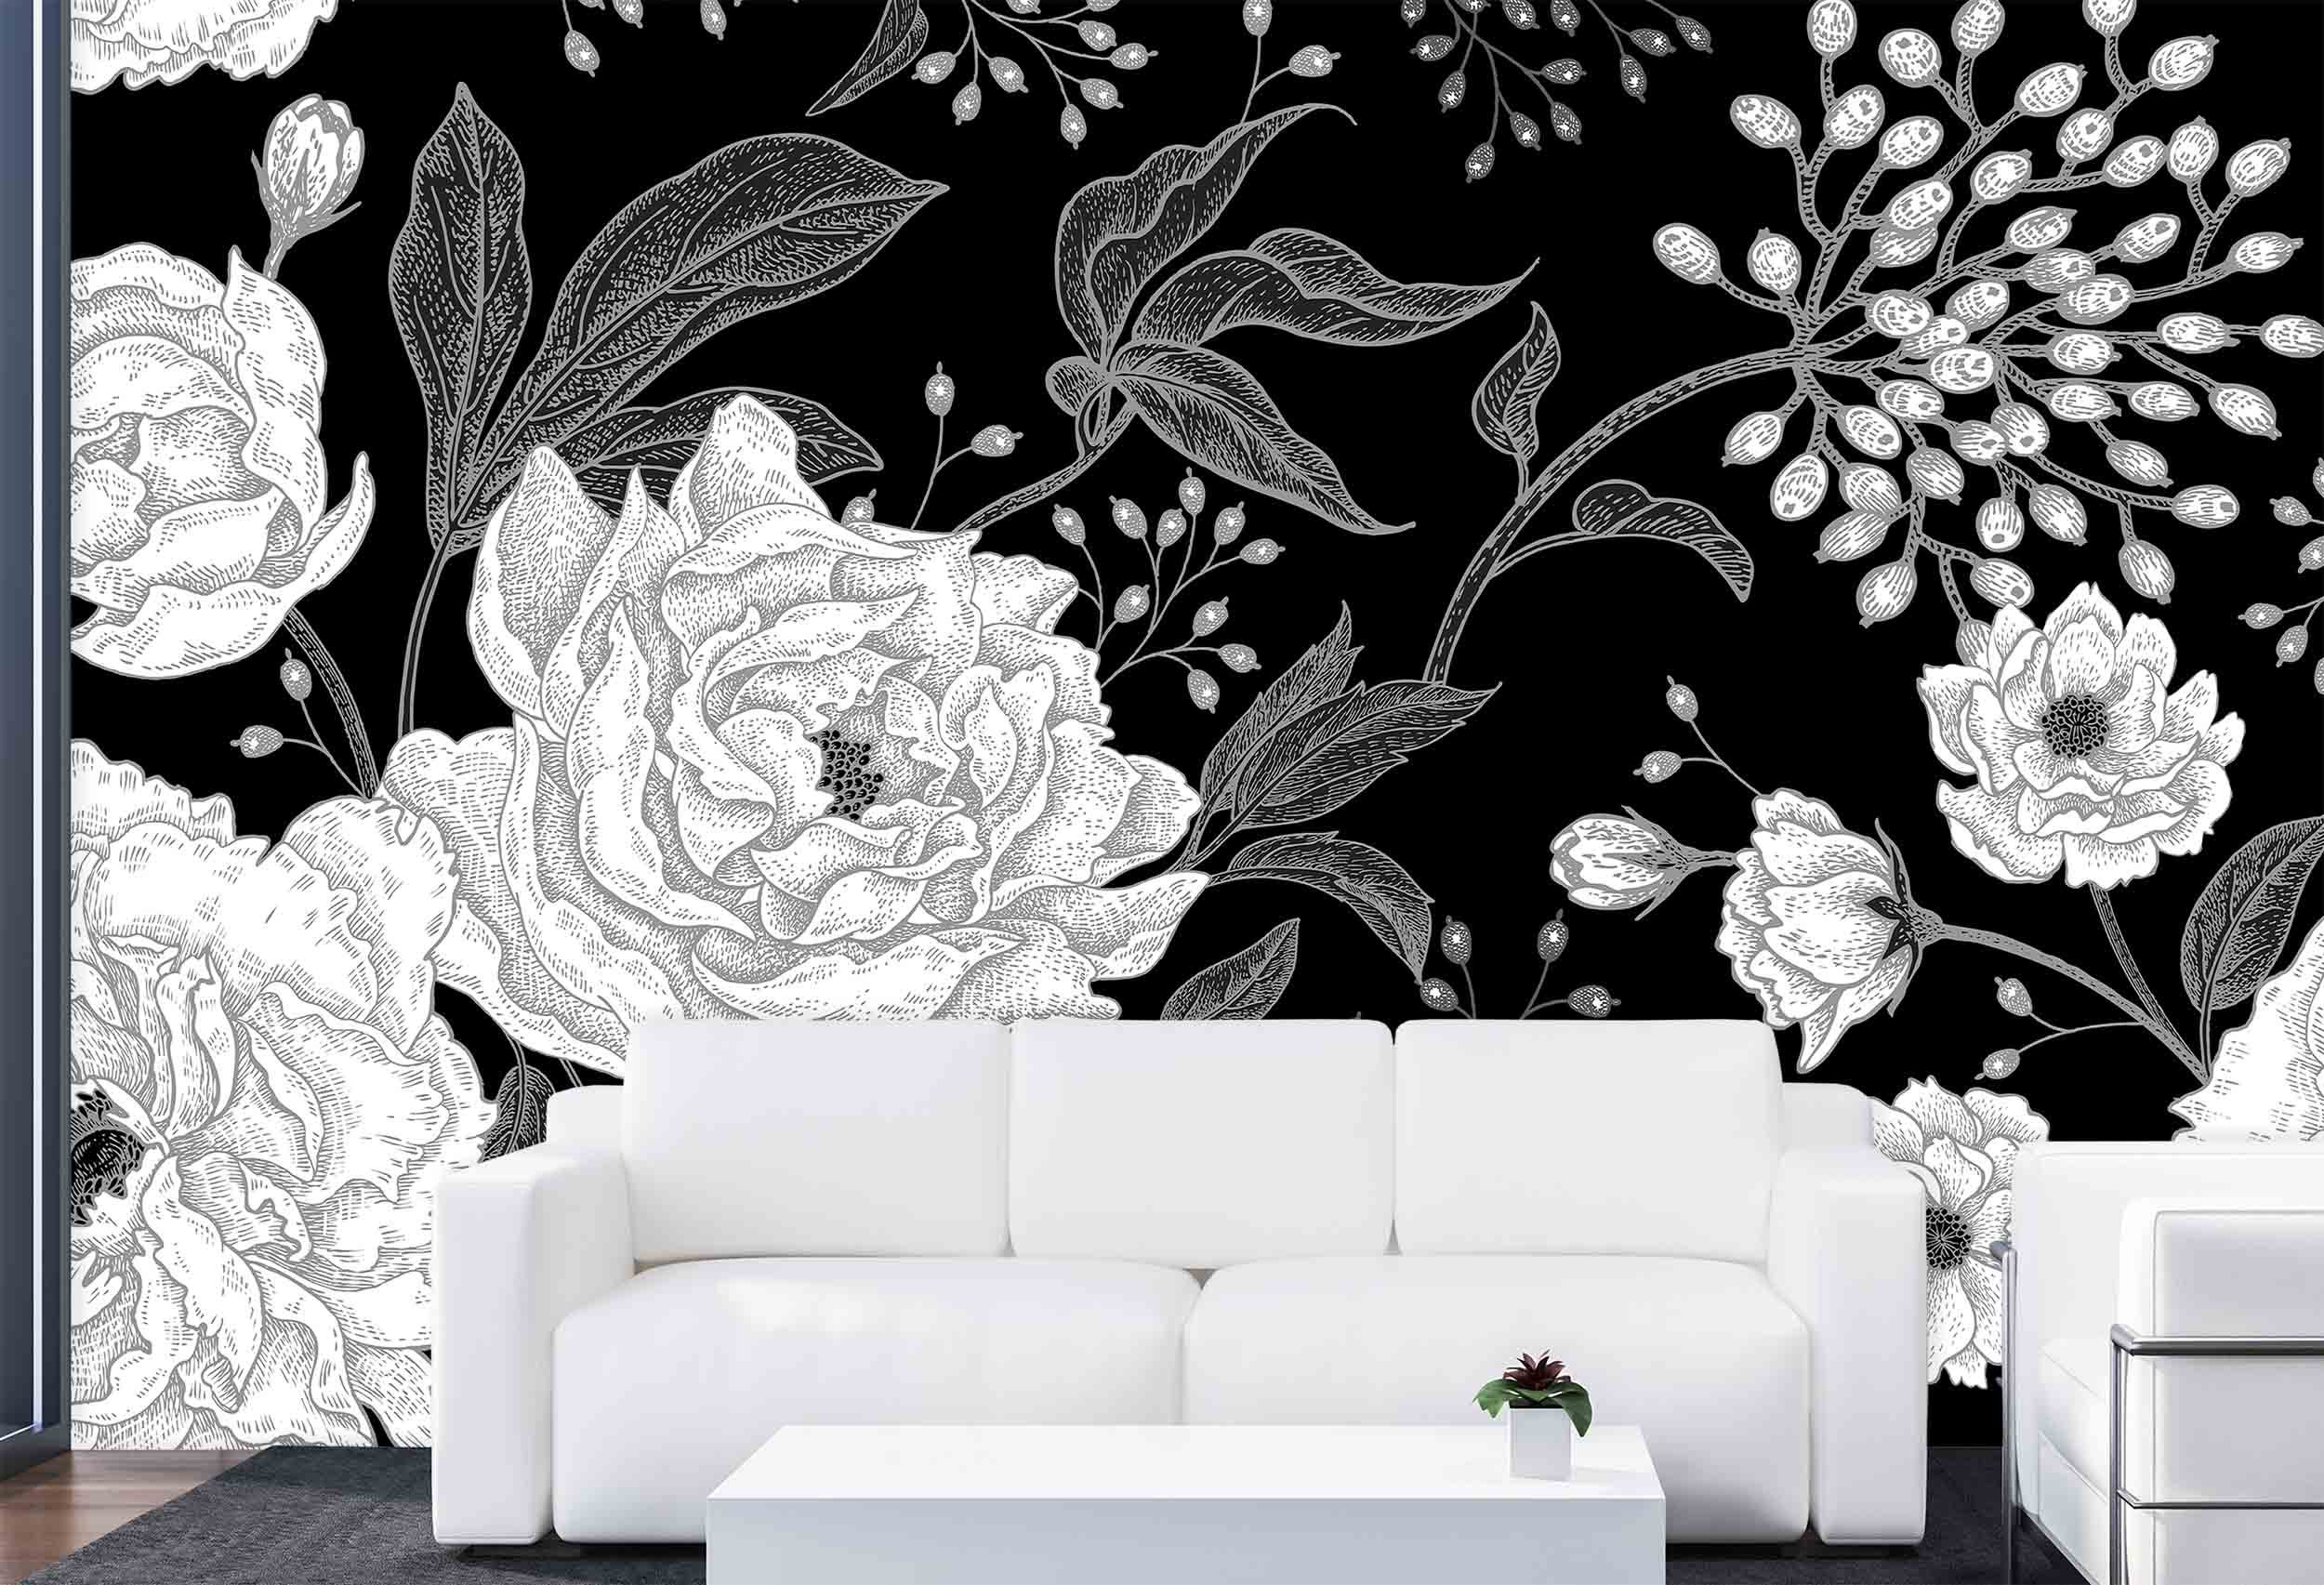 Wallpaper Mural Big Flowers on Black Background (Black and White) |  Muralunique